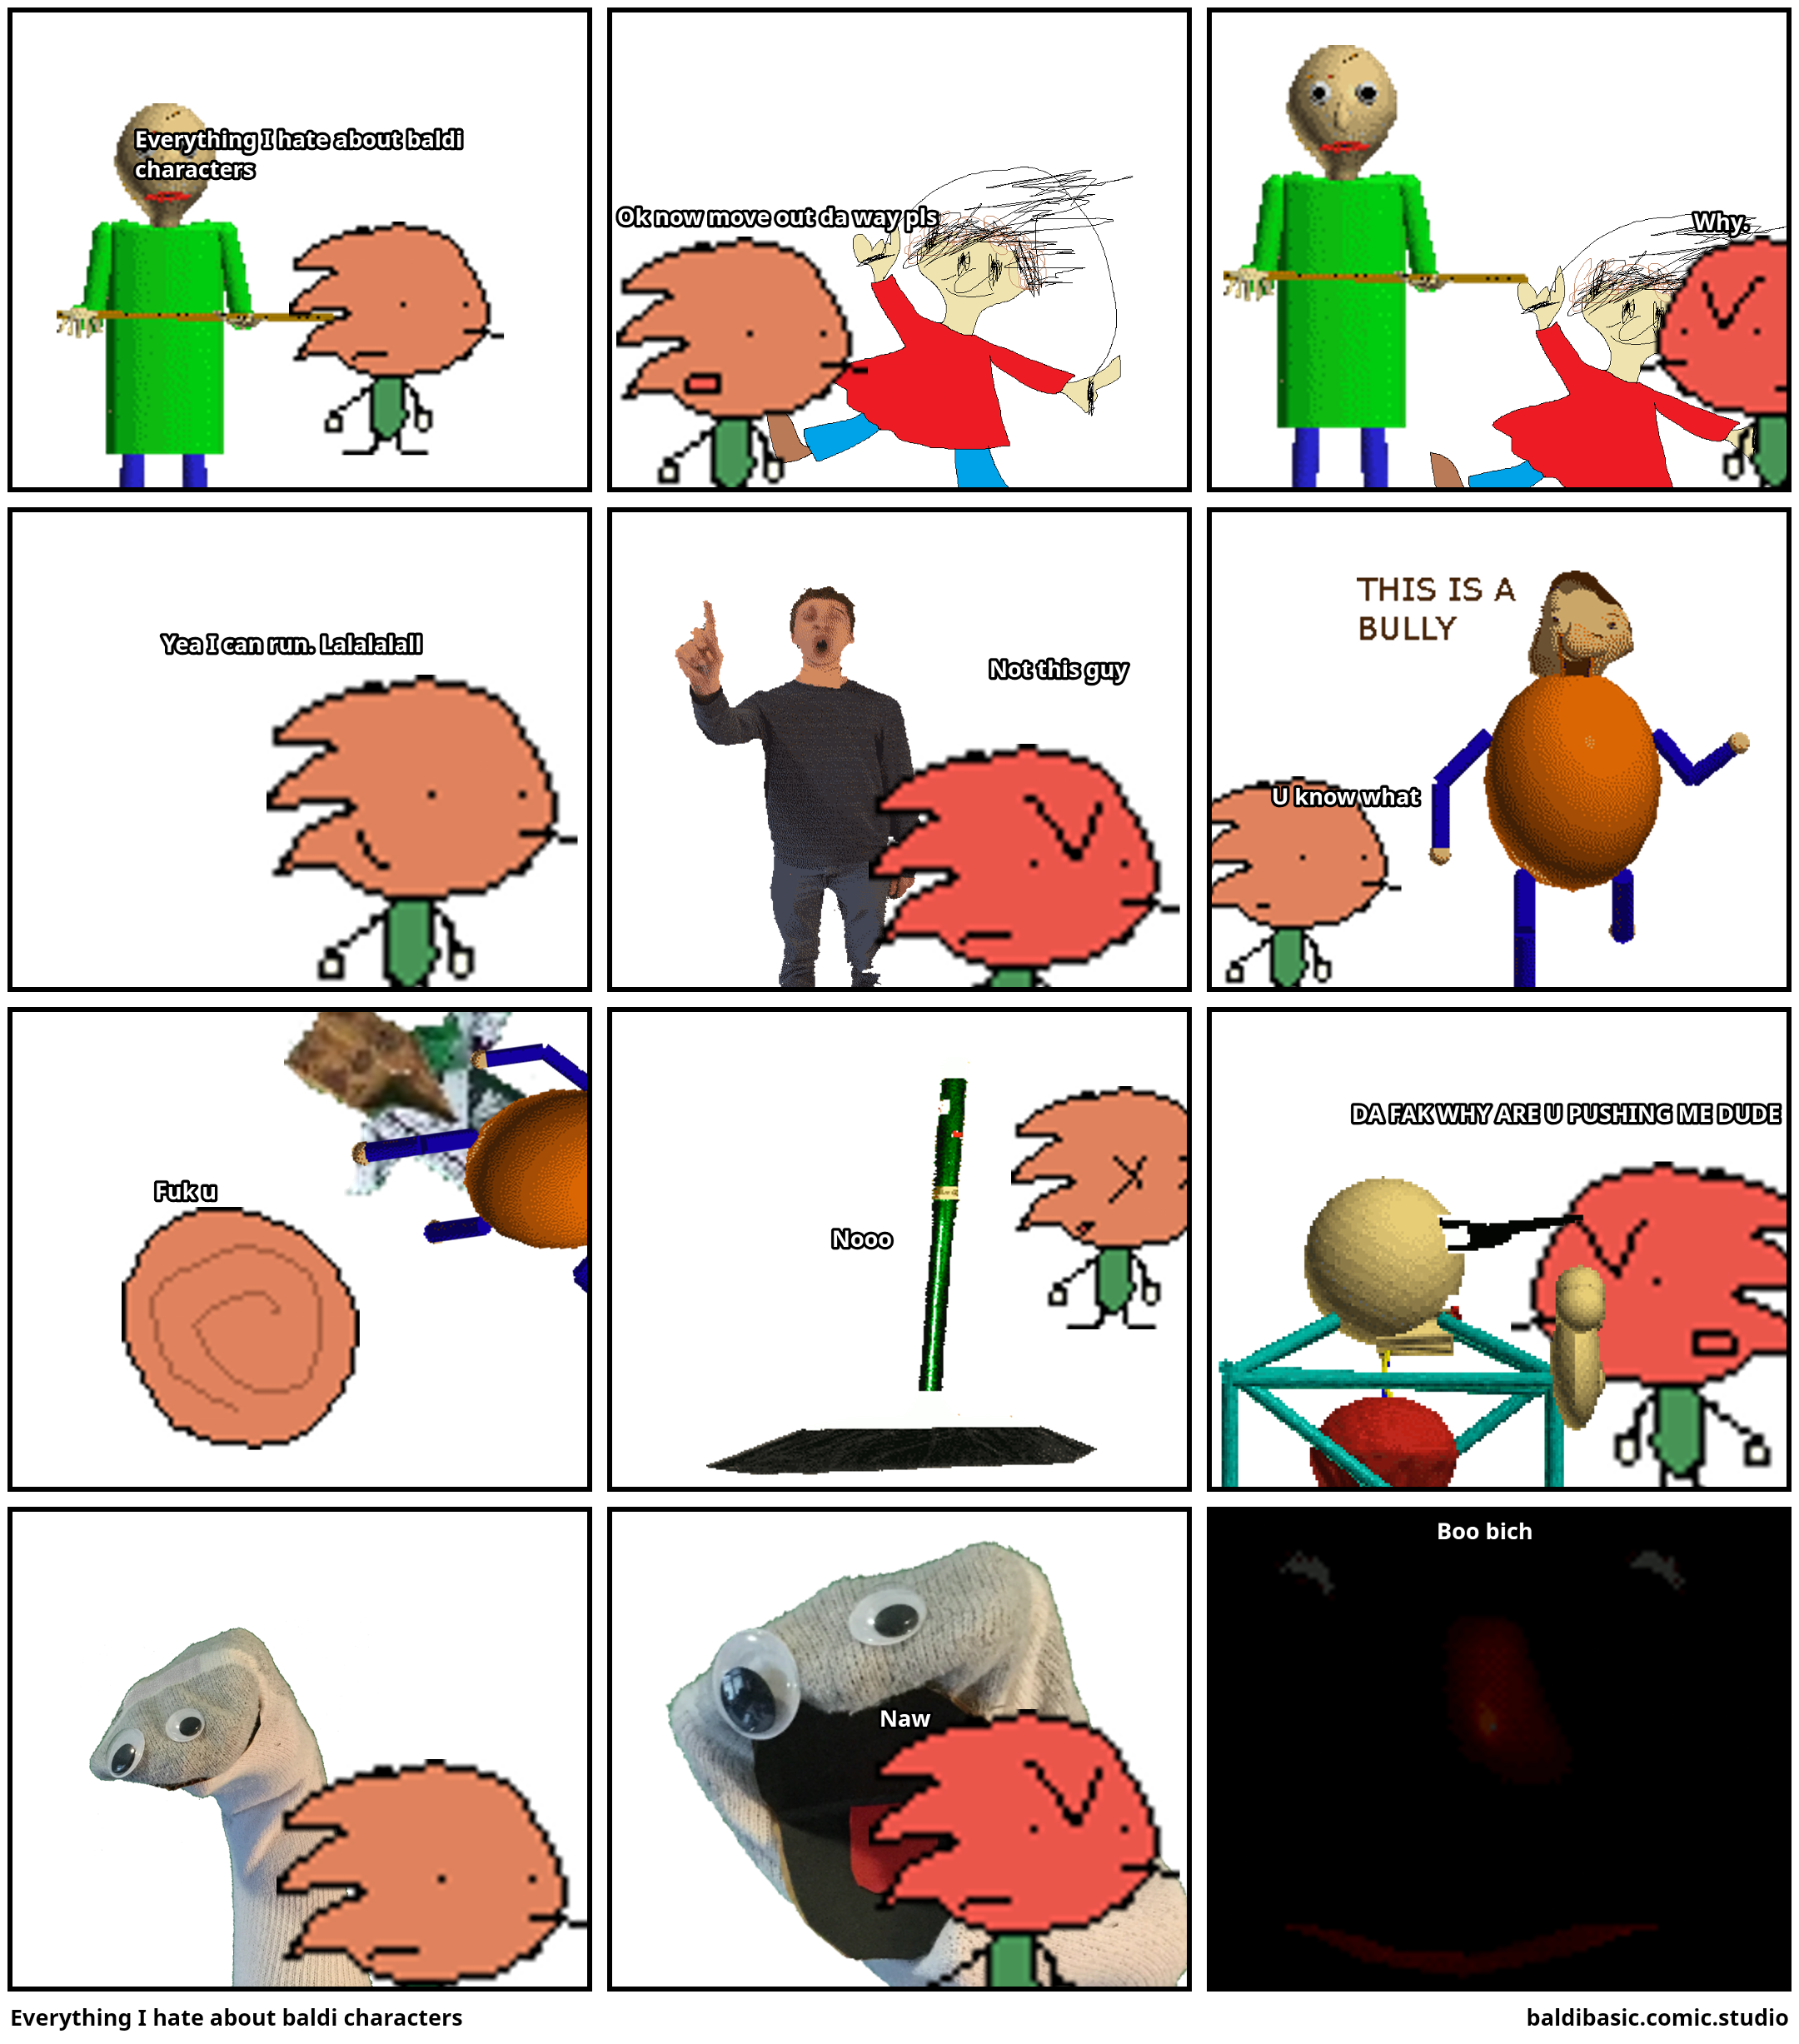 Everything I hate about baldi characters